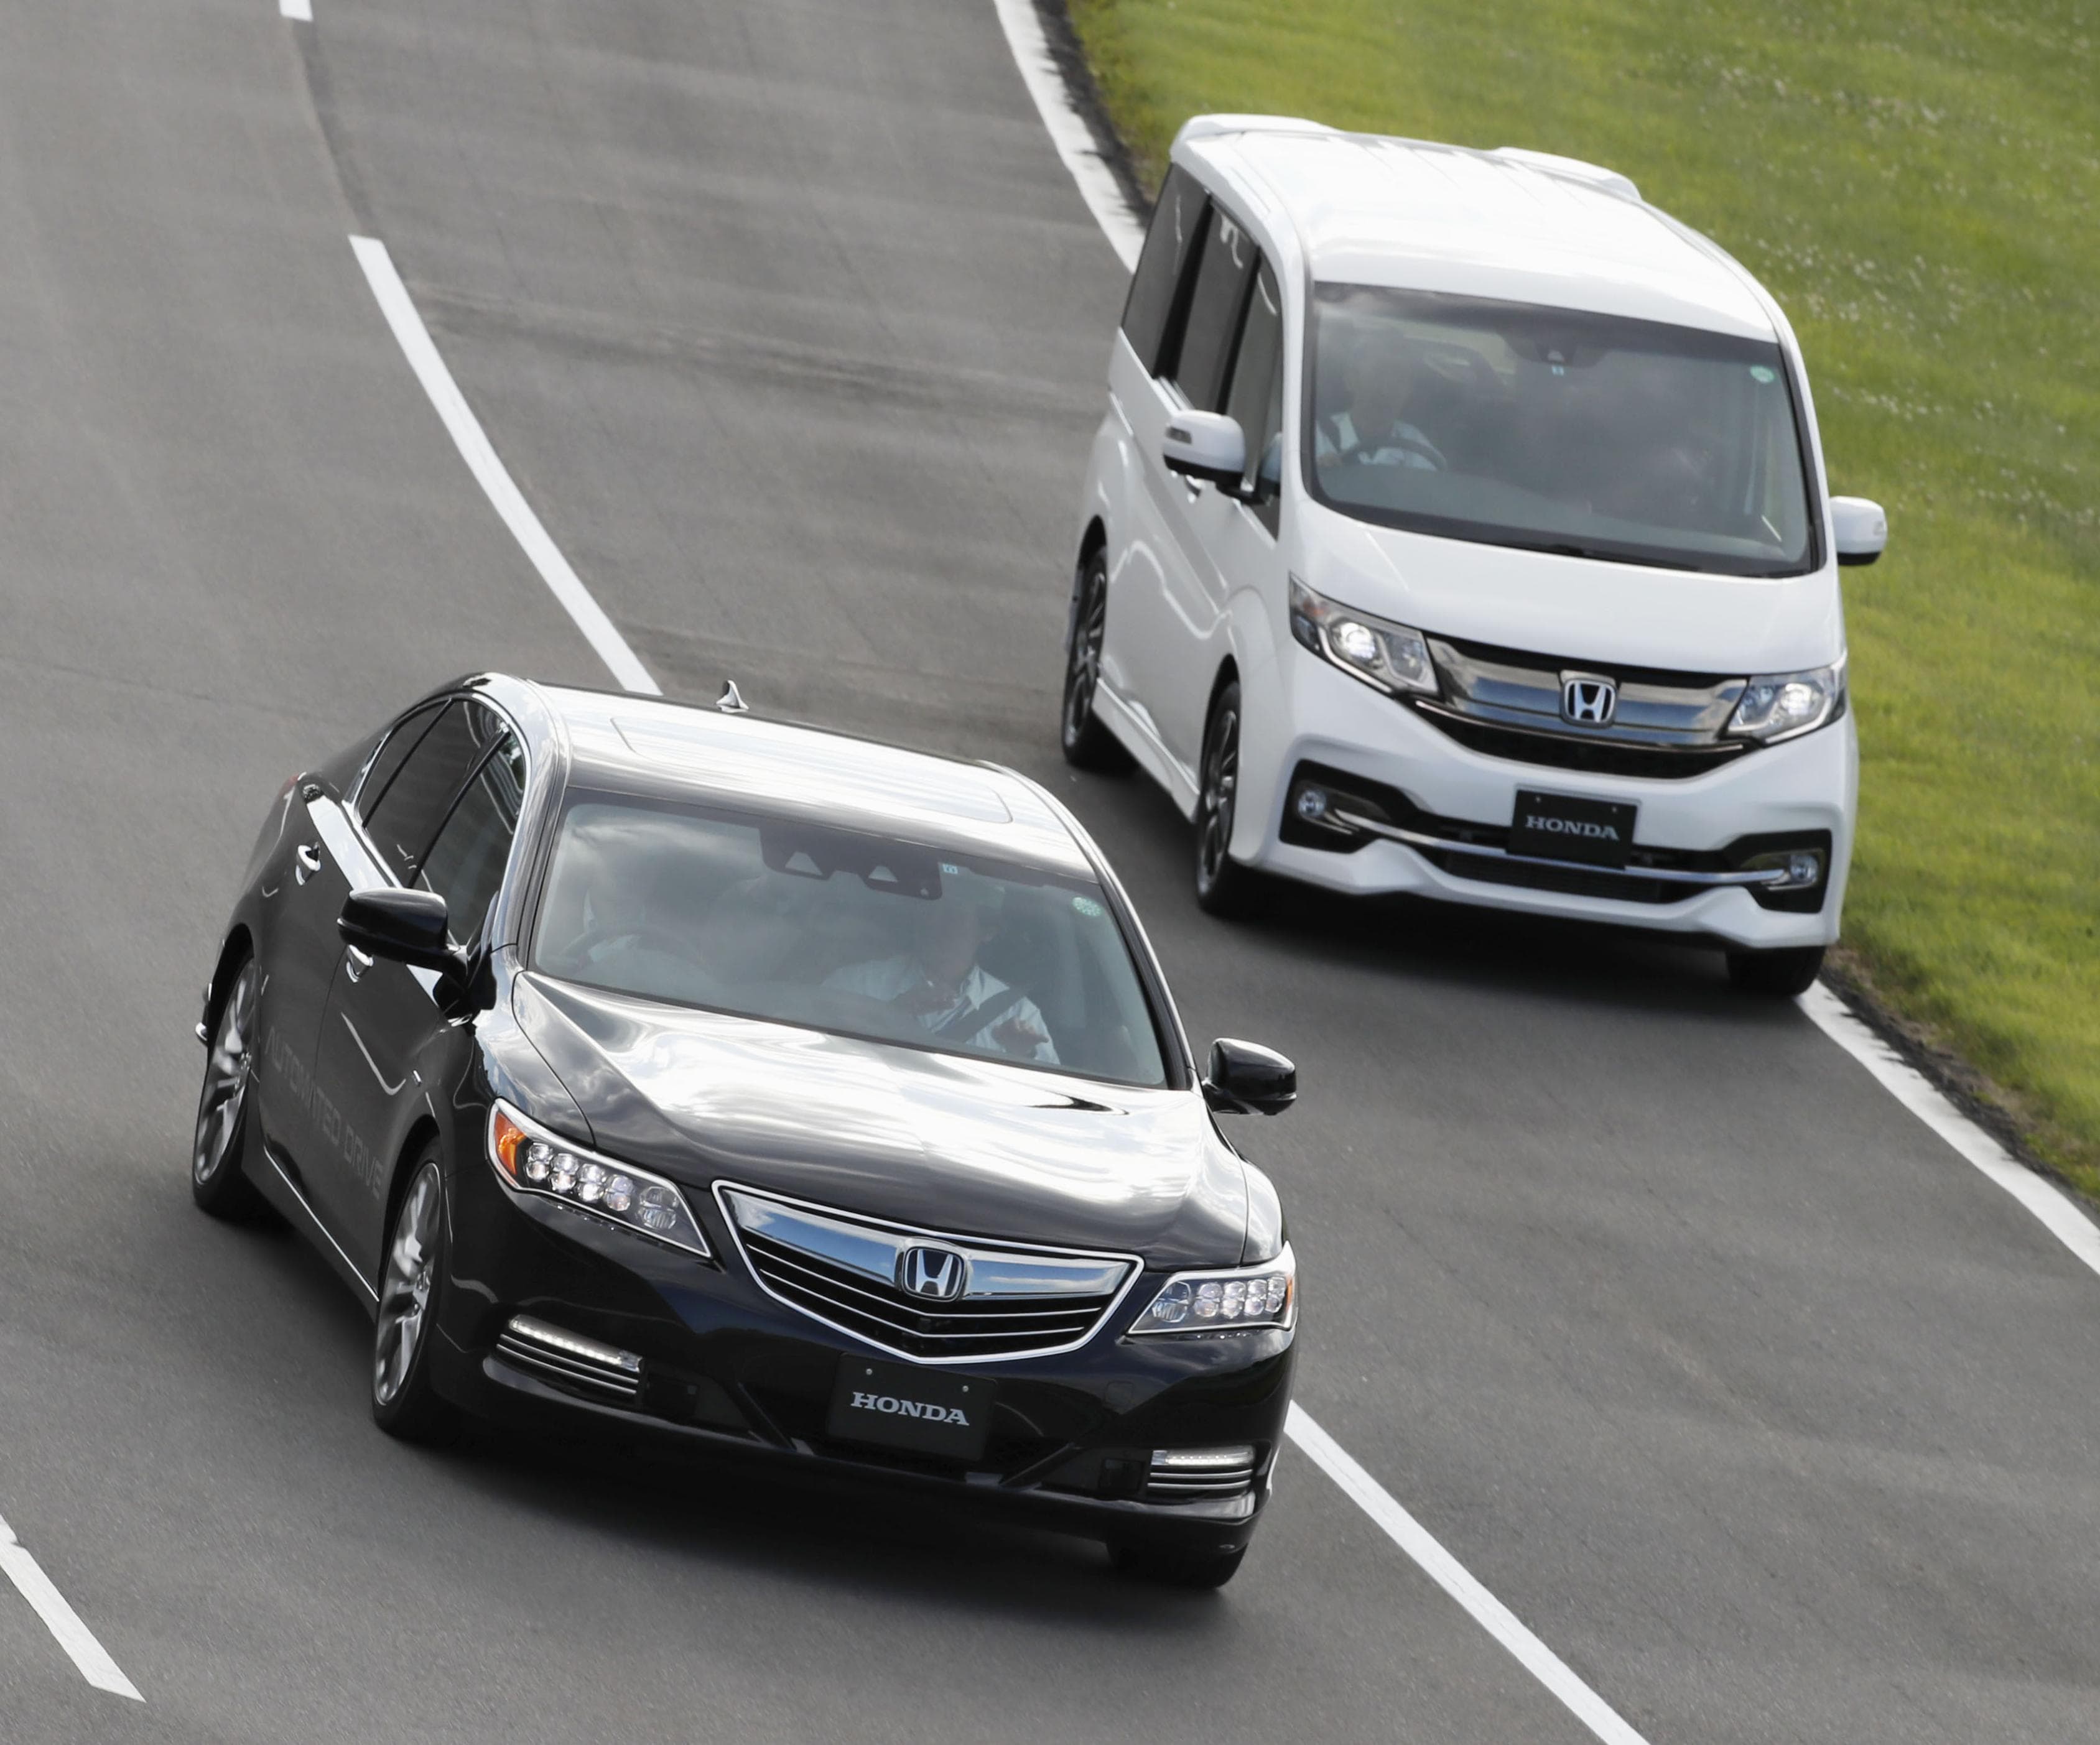 Honda’s New Checklist Makes It Easy for Customers to Buy Certified Used Vehicles